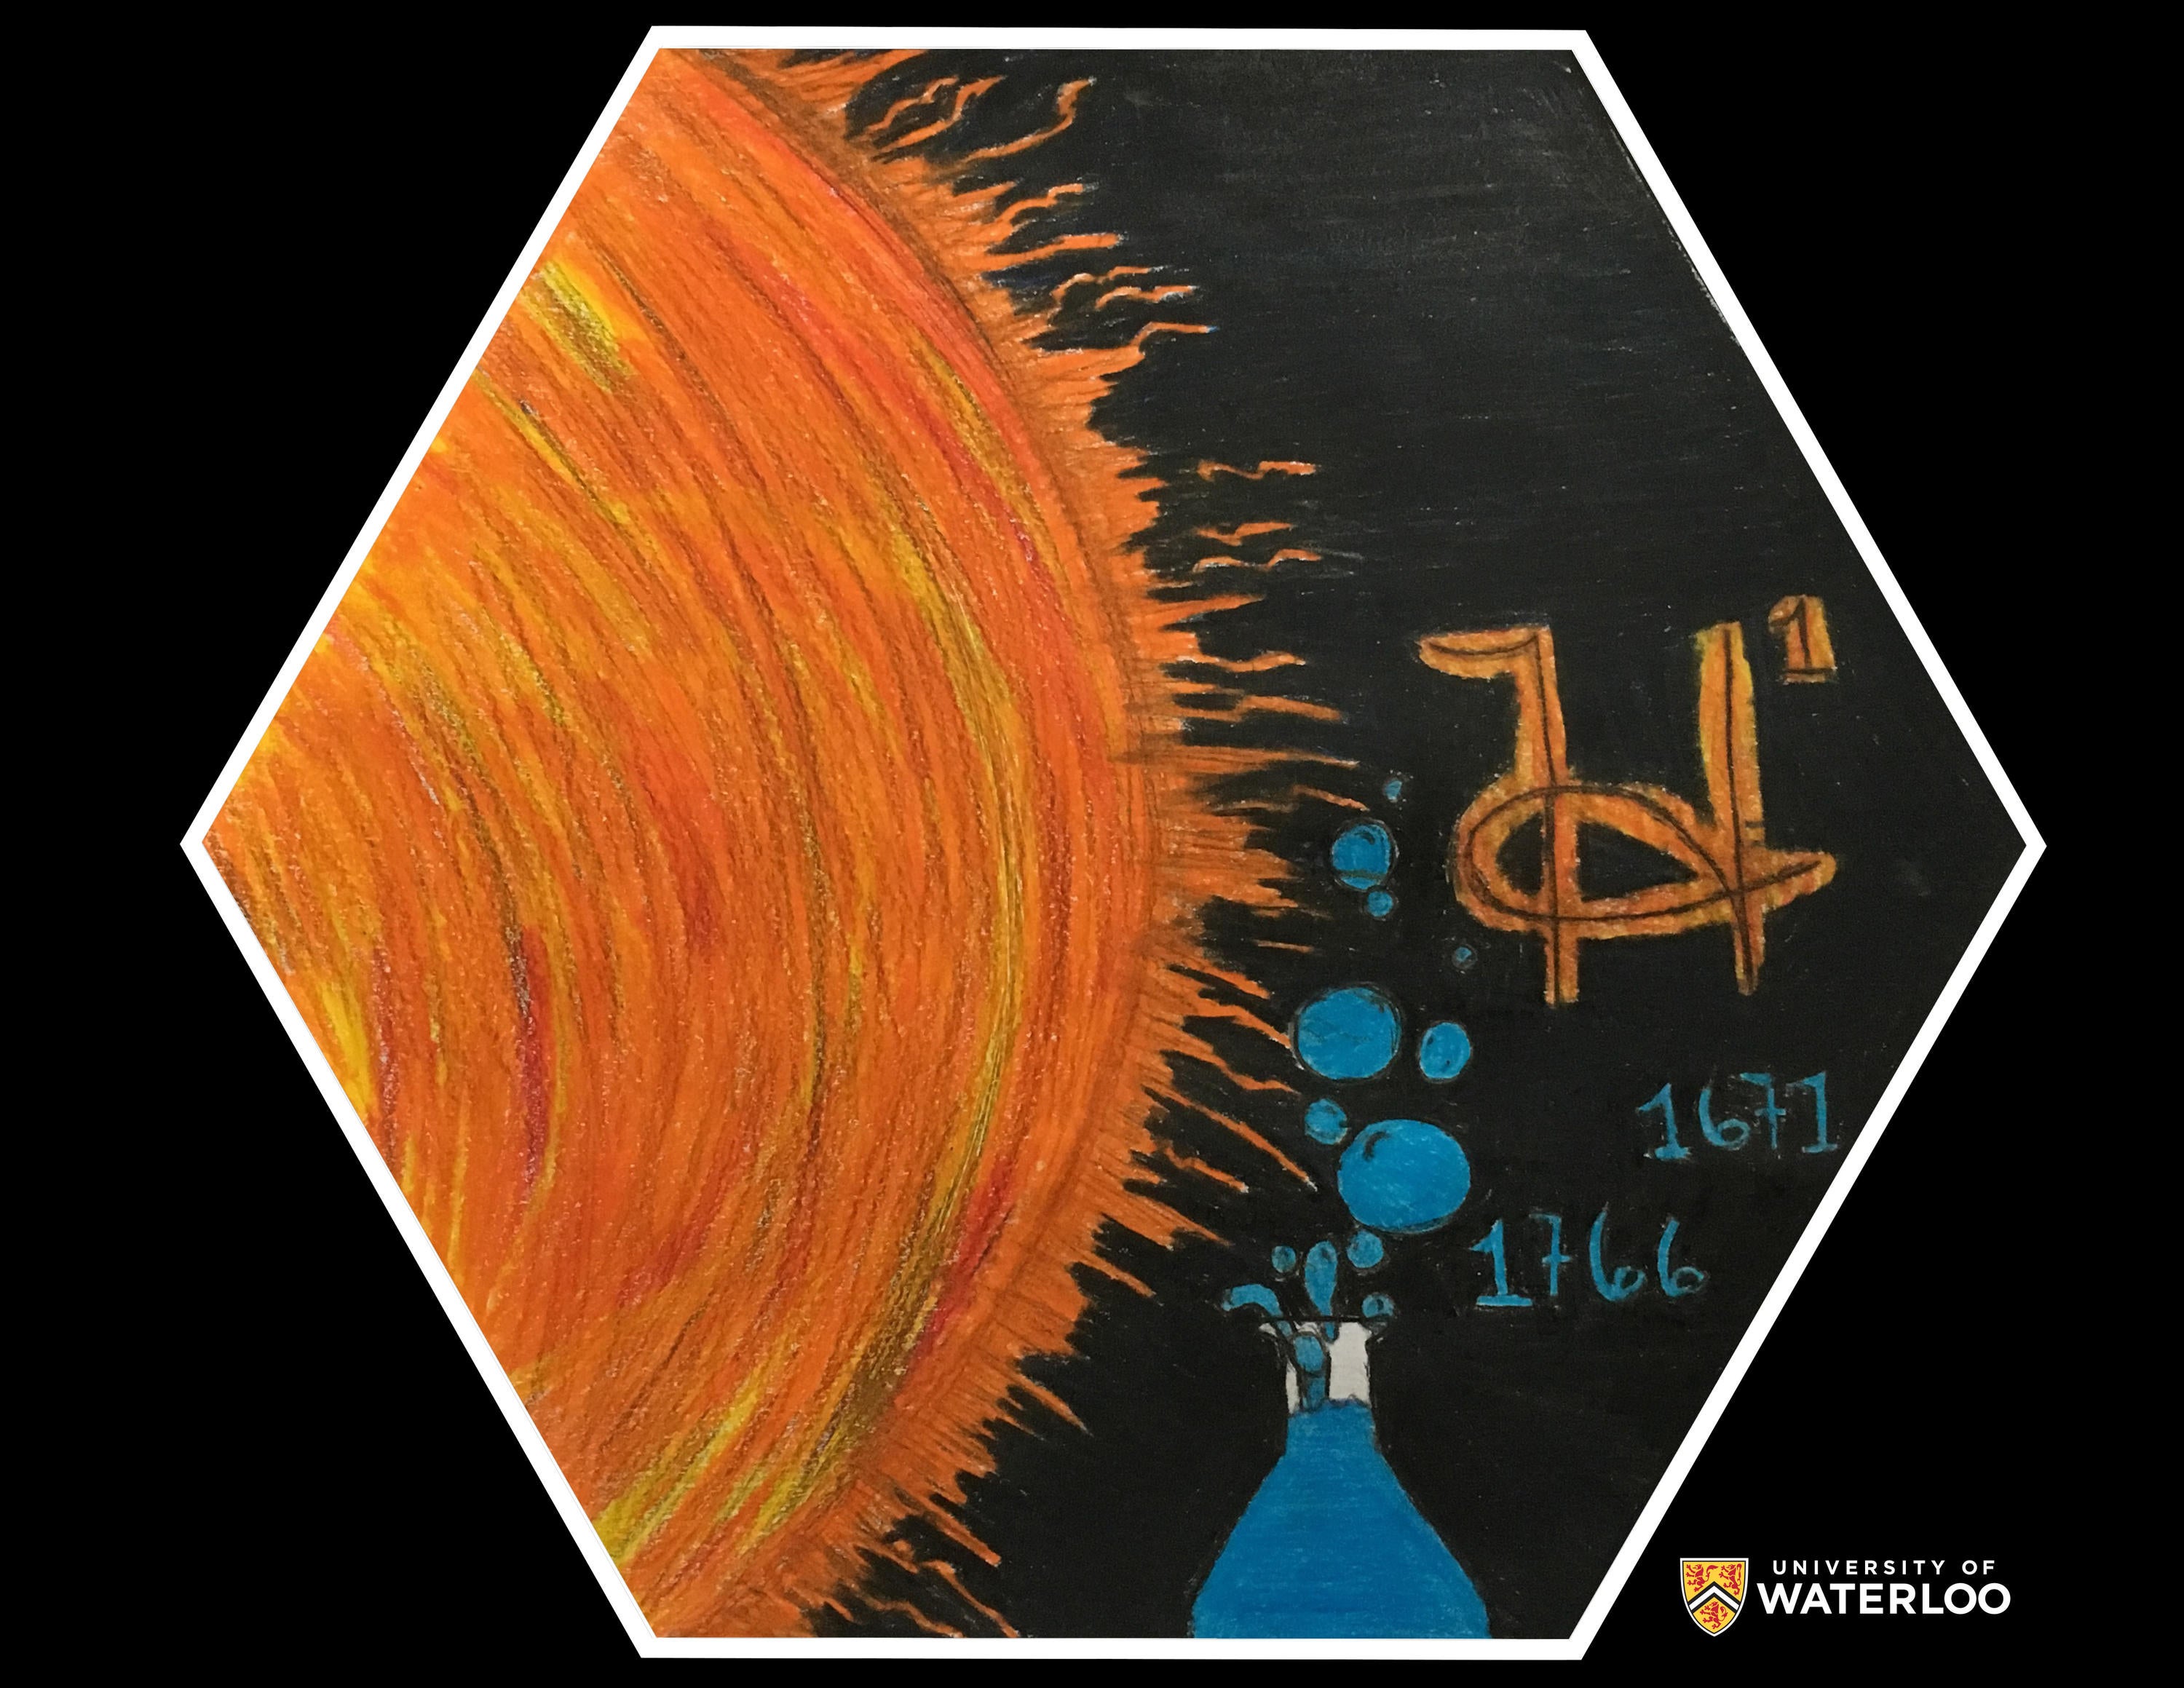 Coloured pencil on black paper. The sun towers over a flask with hydrogen gas bubbling up, the element symbol H and the years 1671 and 1766.